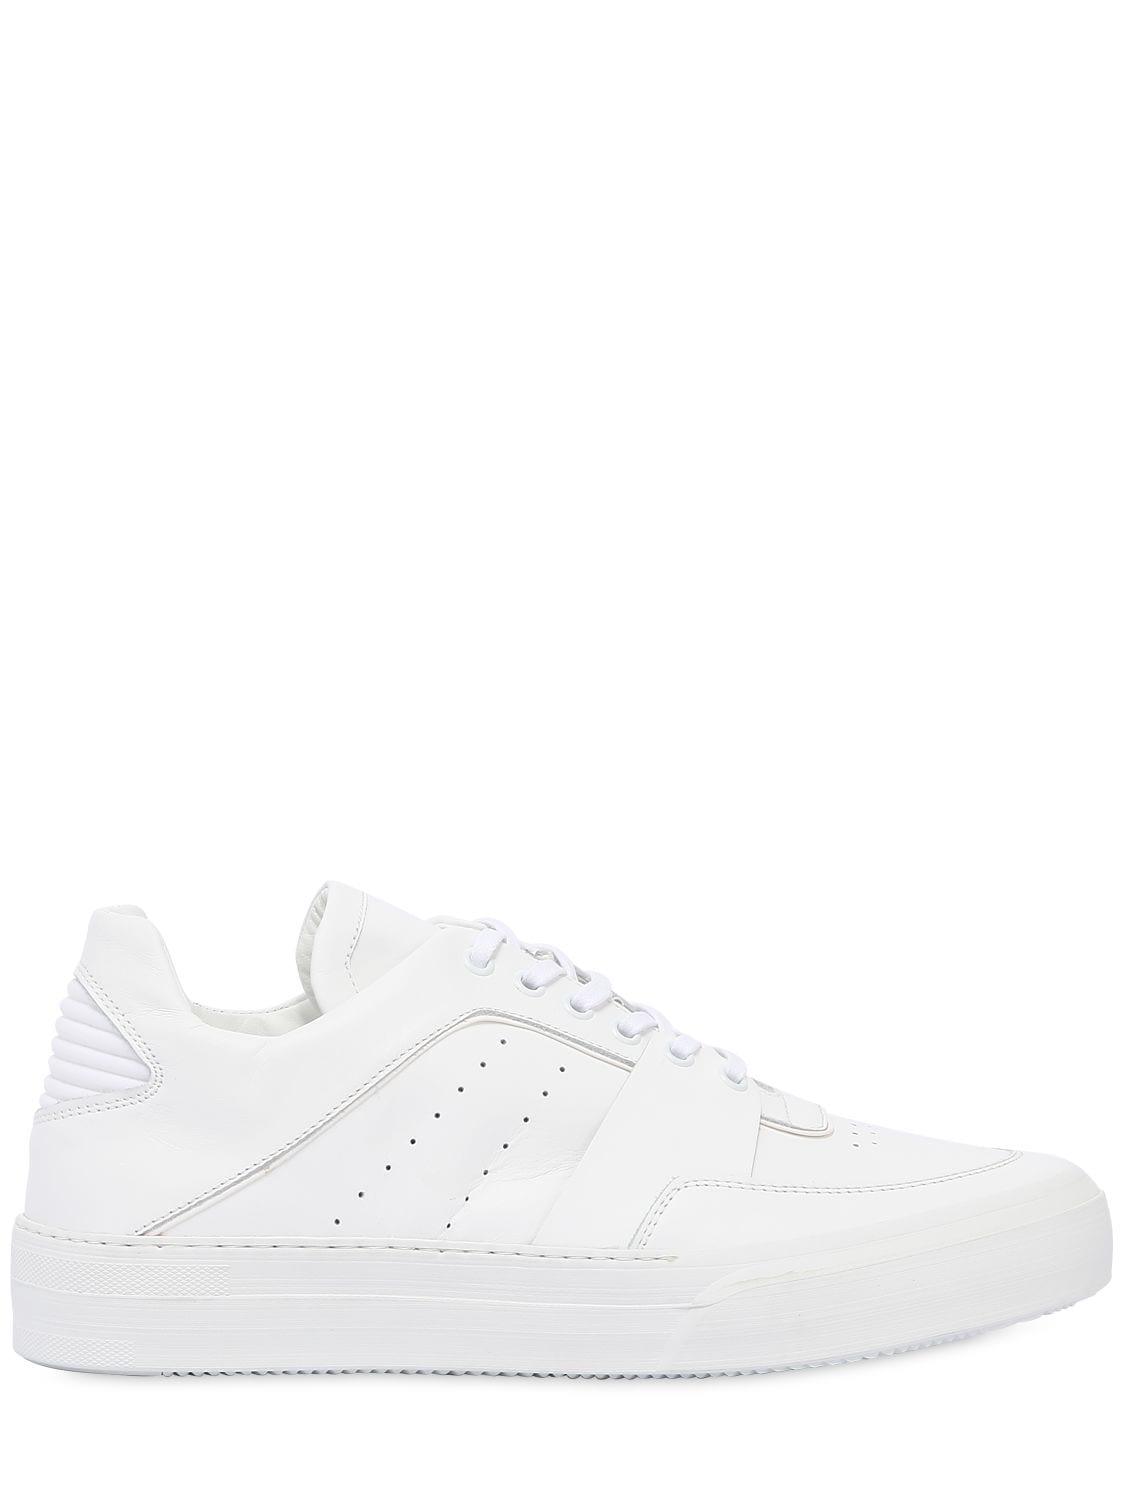 Bikkembergs Arena Platform Leather Sneakers In White